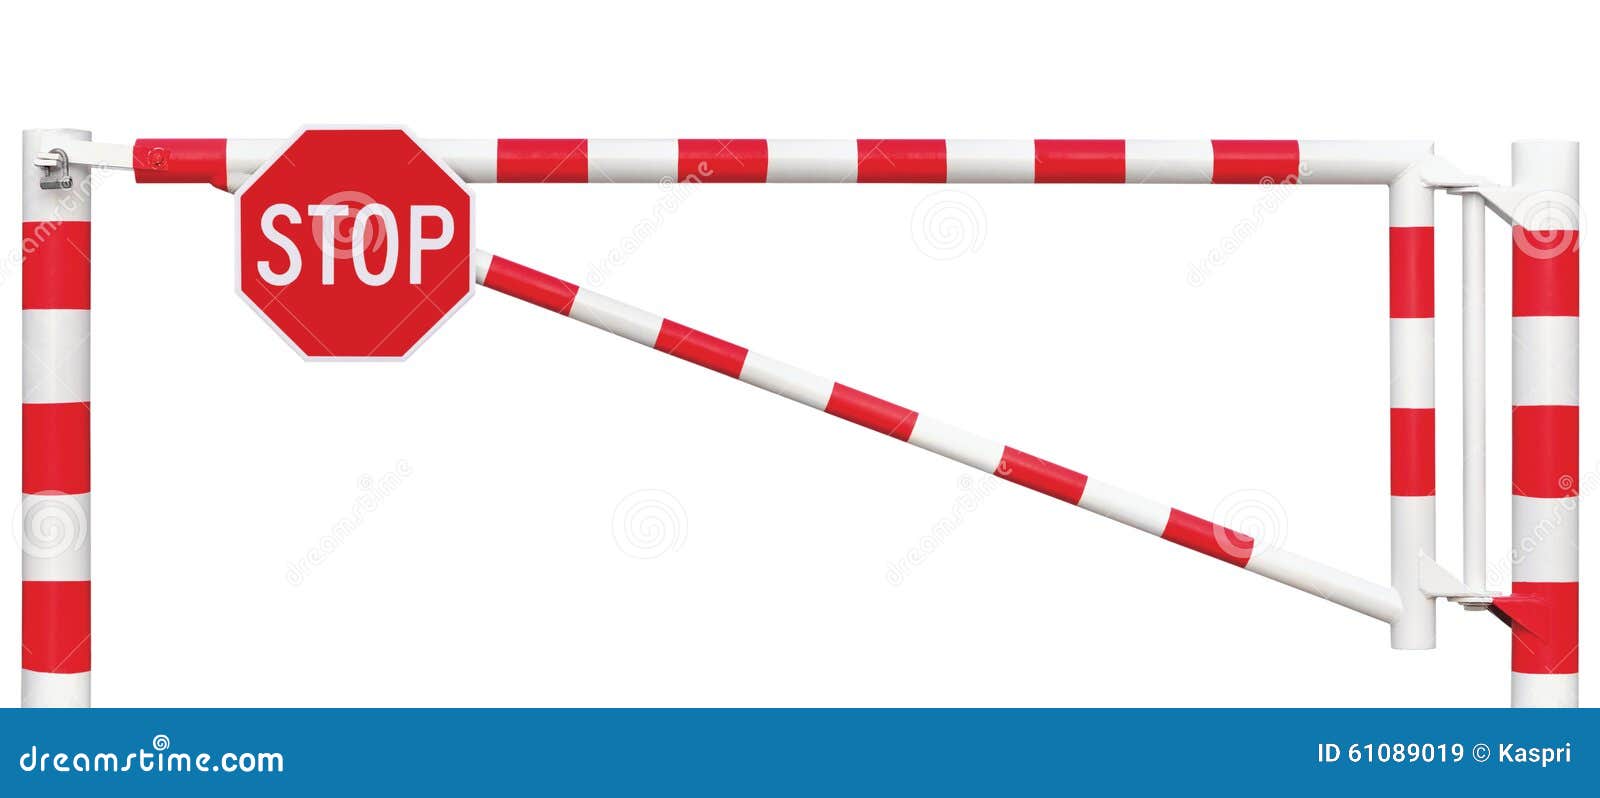 gated road barrier closeup, octagonal stop sign, roadway gate bar in bright white and red, traffic entry stop block security point